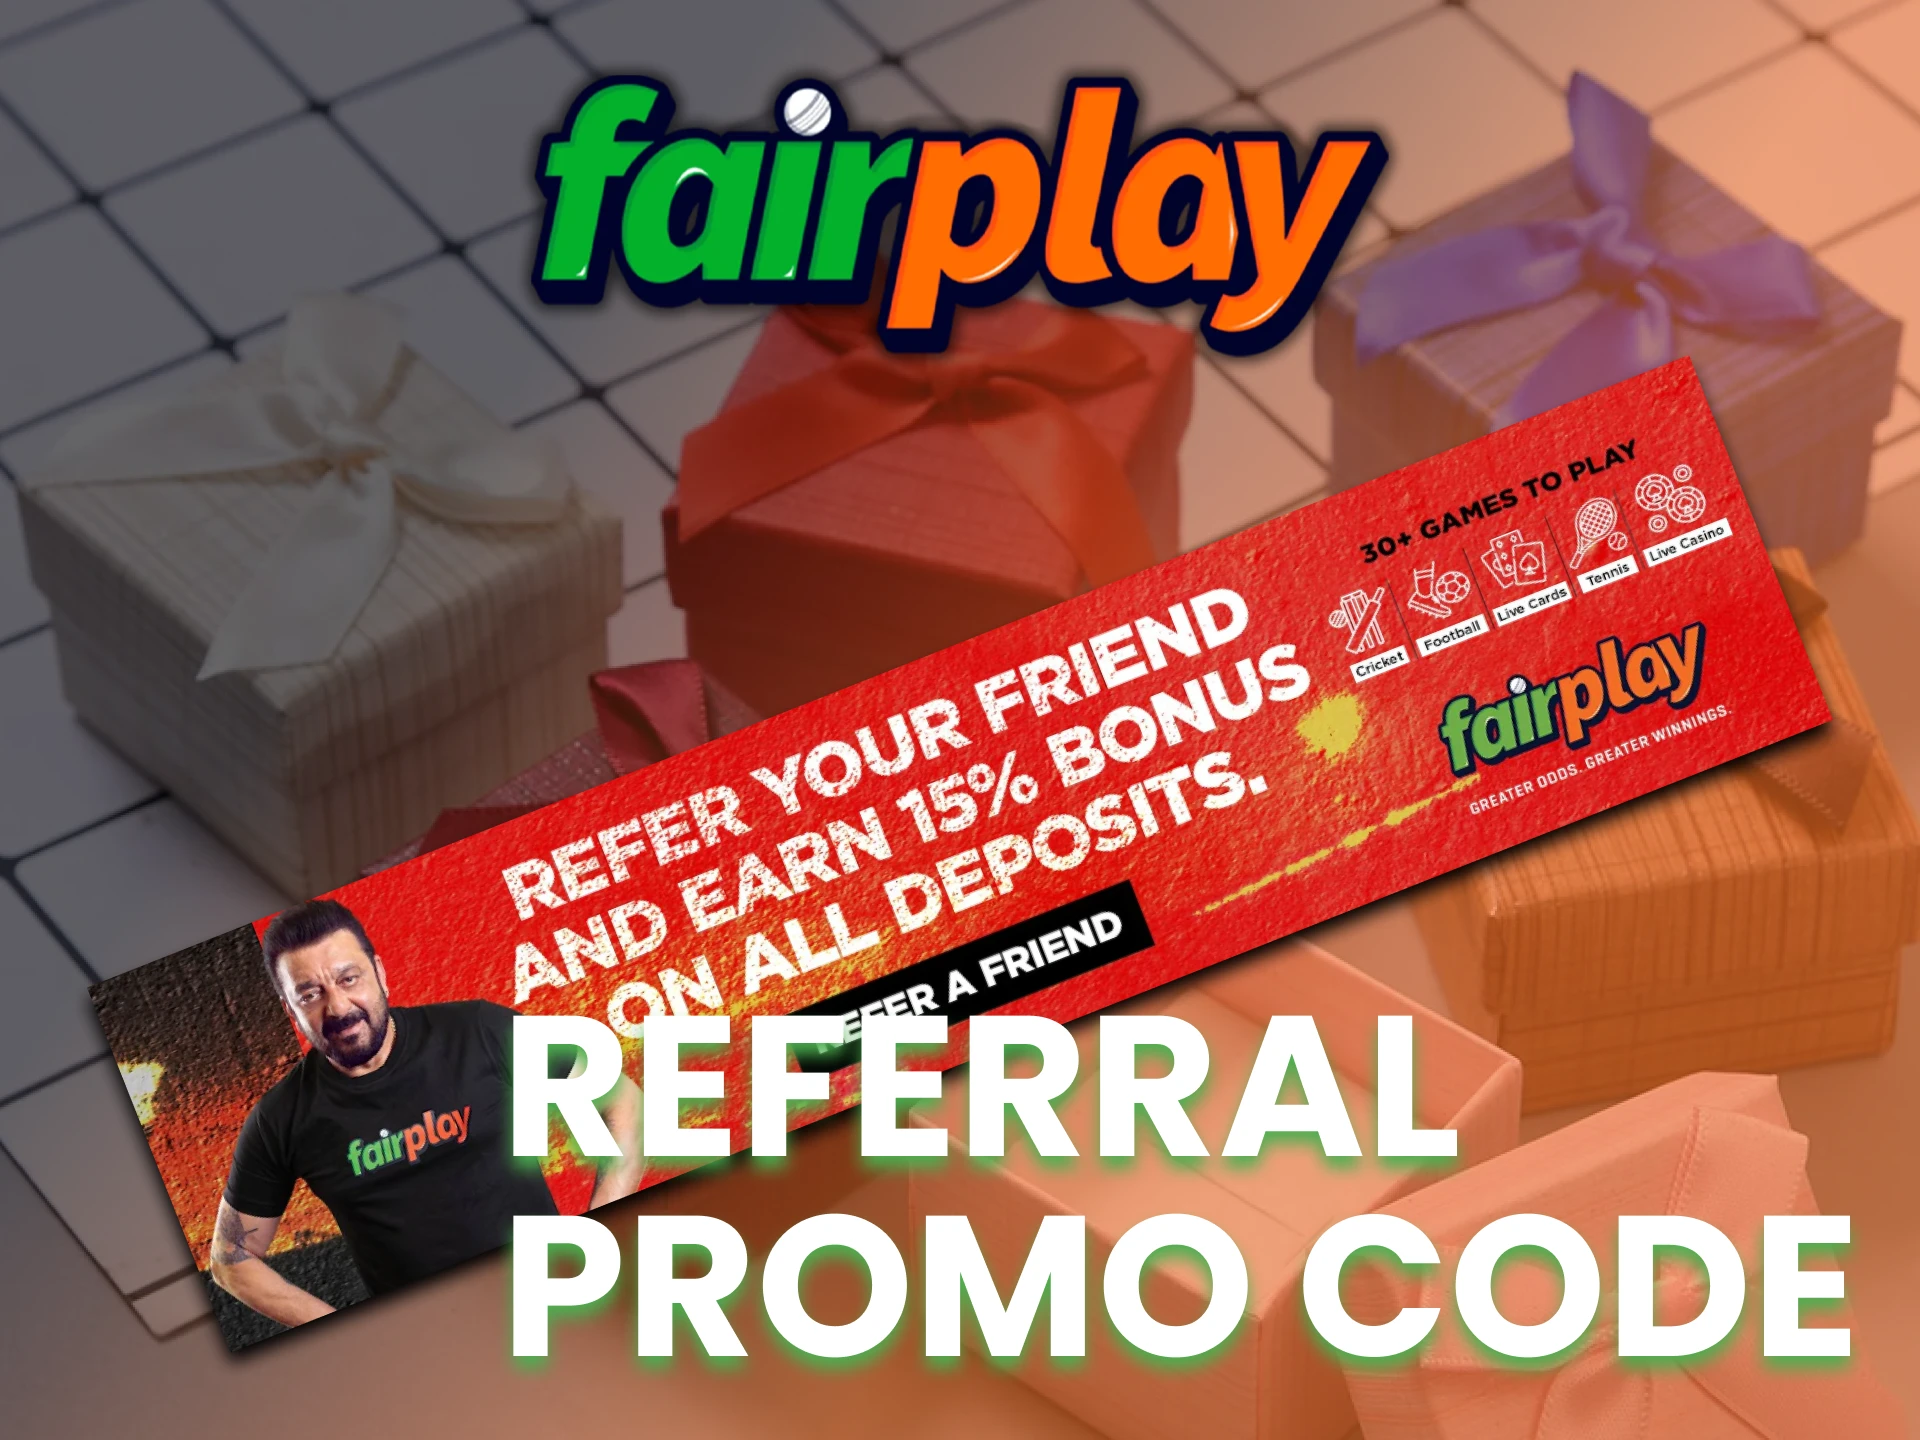 Insert your promocode during registration at the Fairplay.